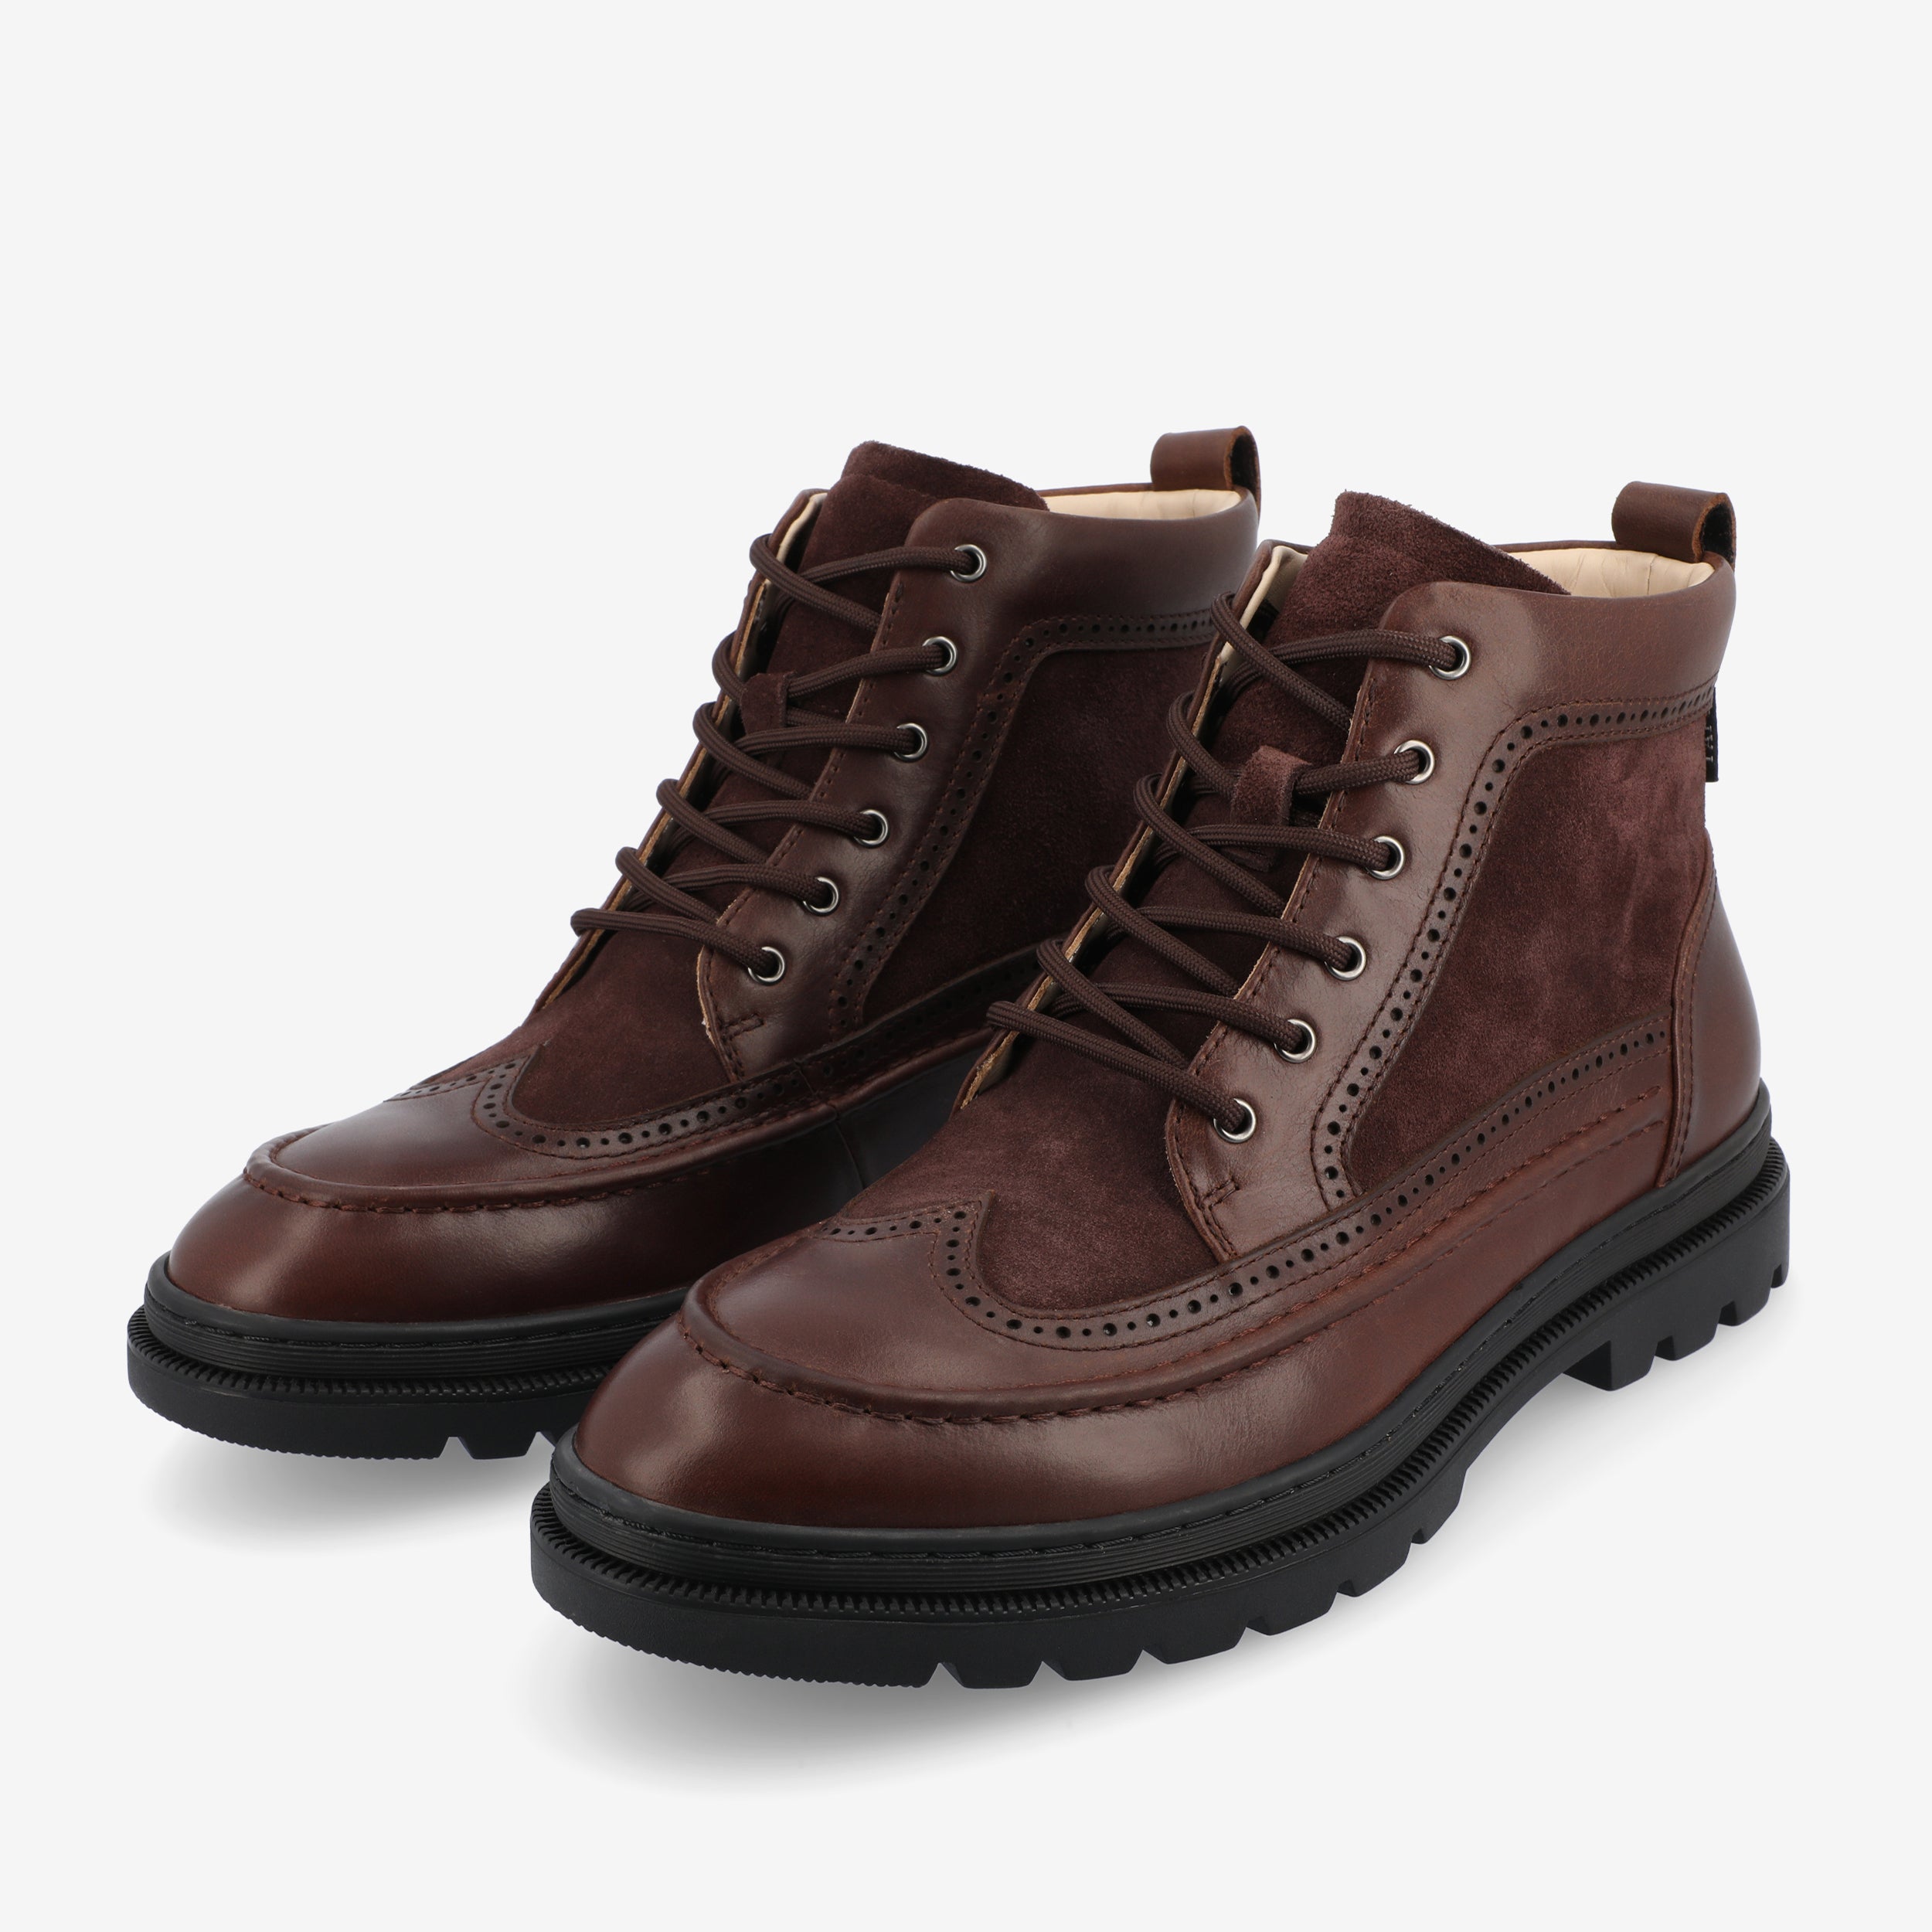 Model 008 Boot In Chocolate (Final Sale)